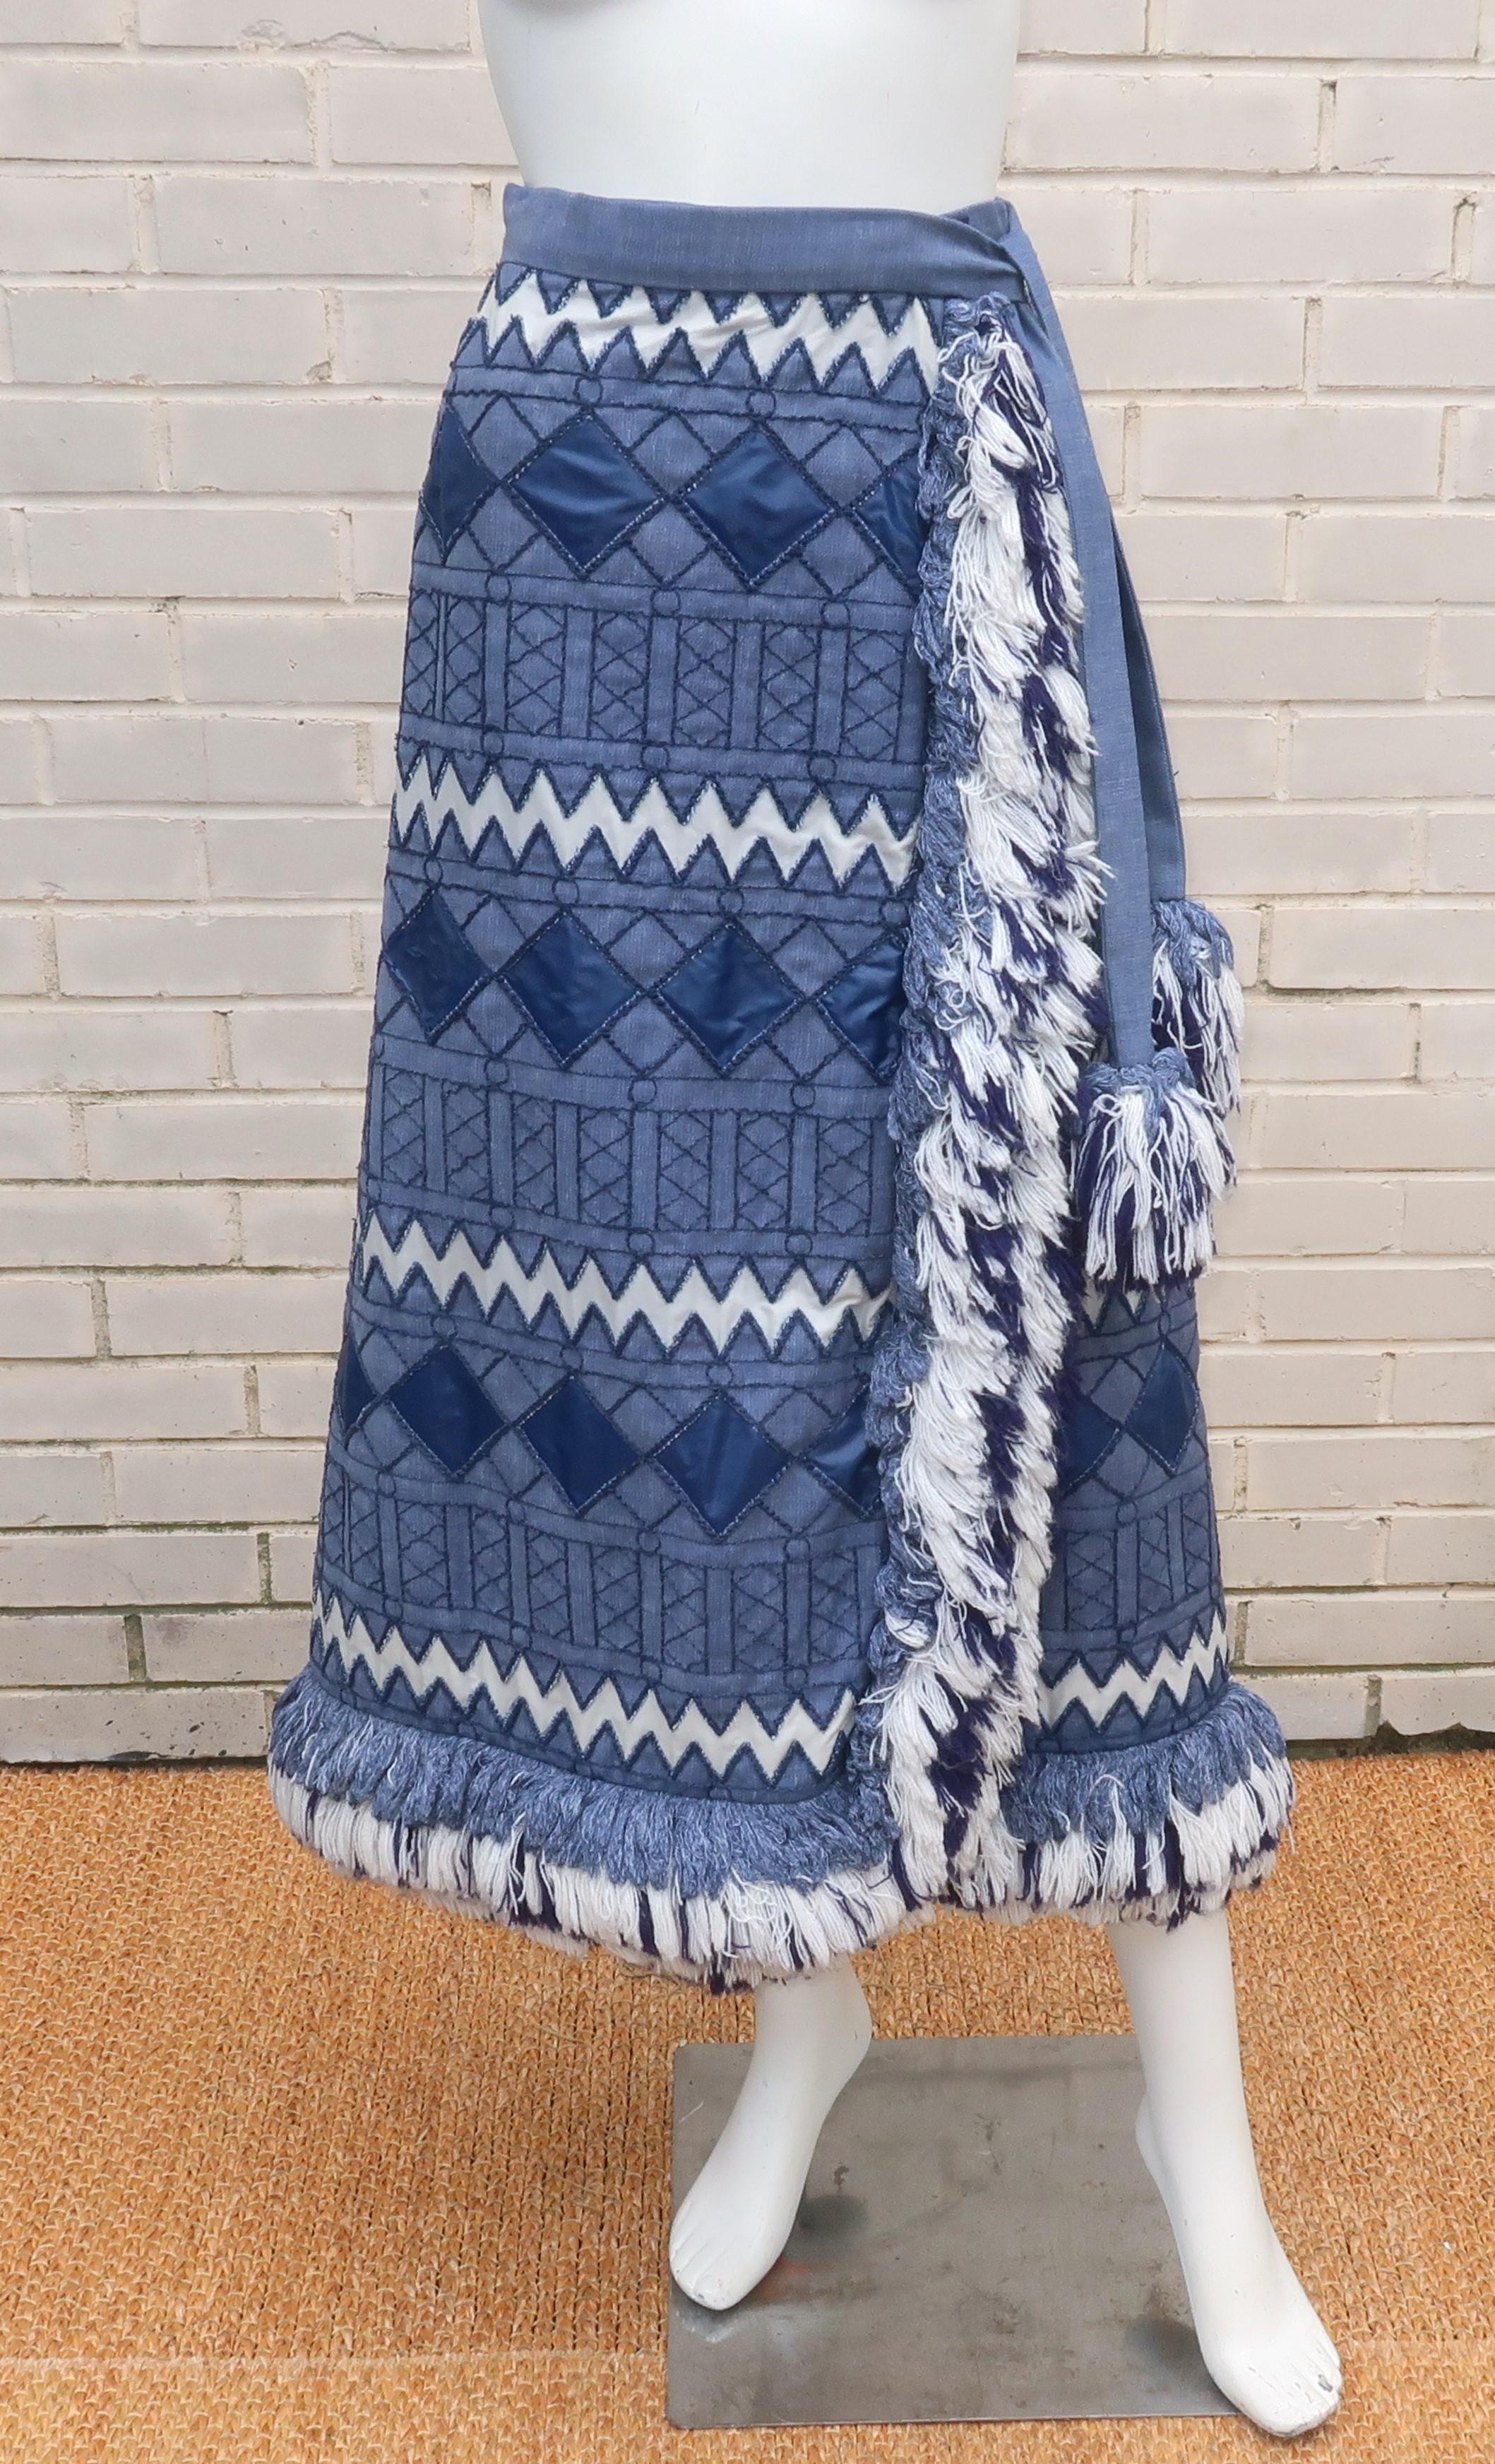 Late 1960's Geoffrey Beene denim wrap skirt with a geometric design accented by shiny blue and white nylon fabric as well as rows of yarn embroidery and heavy fringe.  The front wrap silhouette is held closed by a hidden band of velcro (an exciting